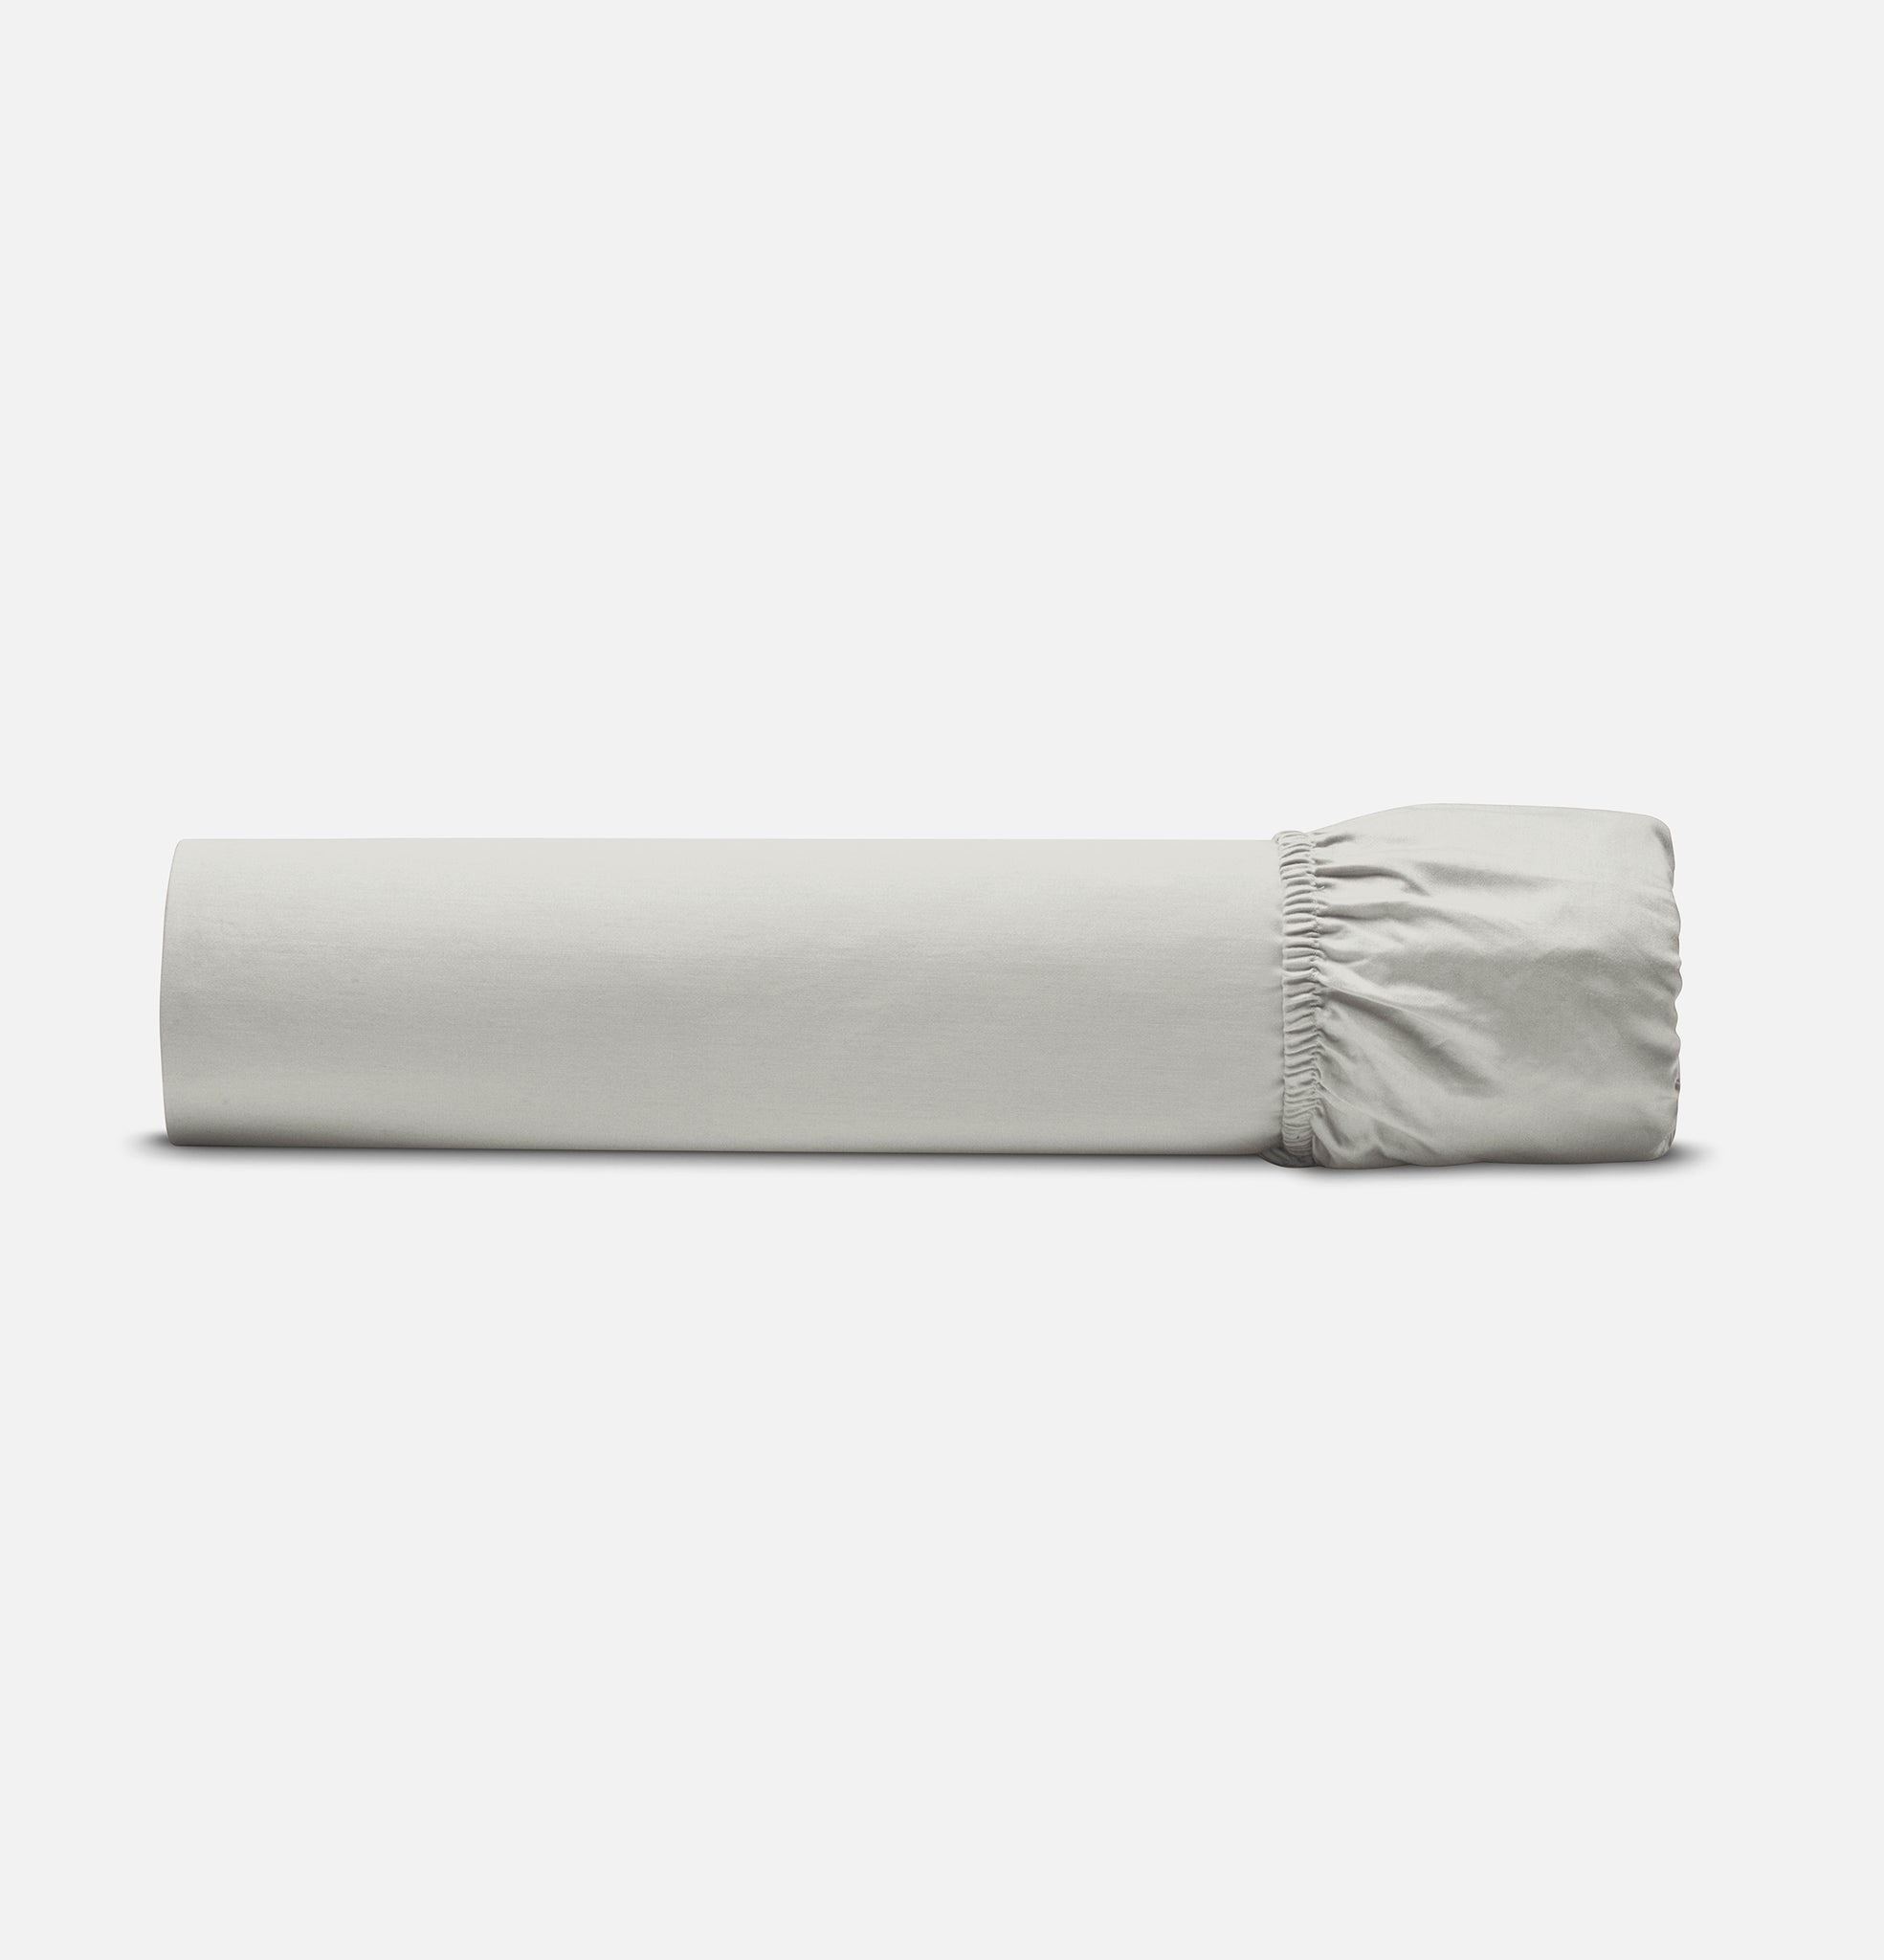 Equinox silver fitted sheet